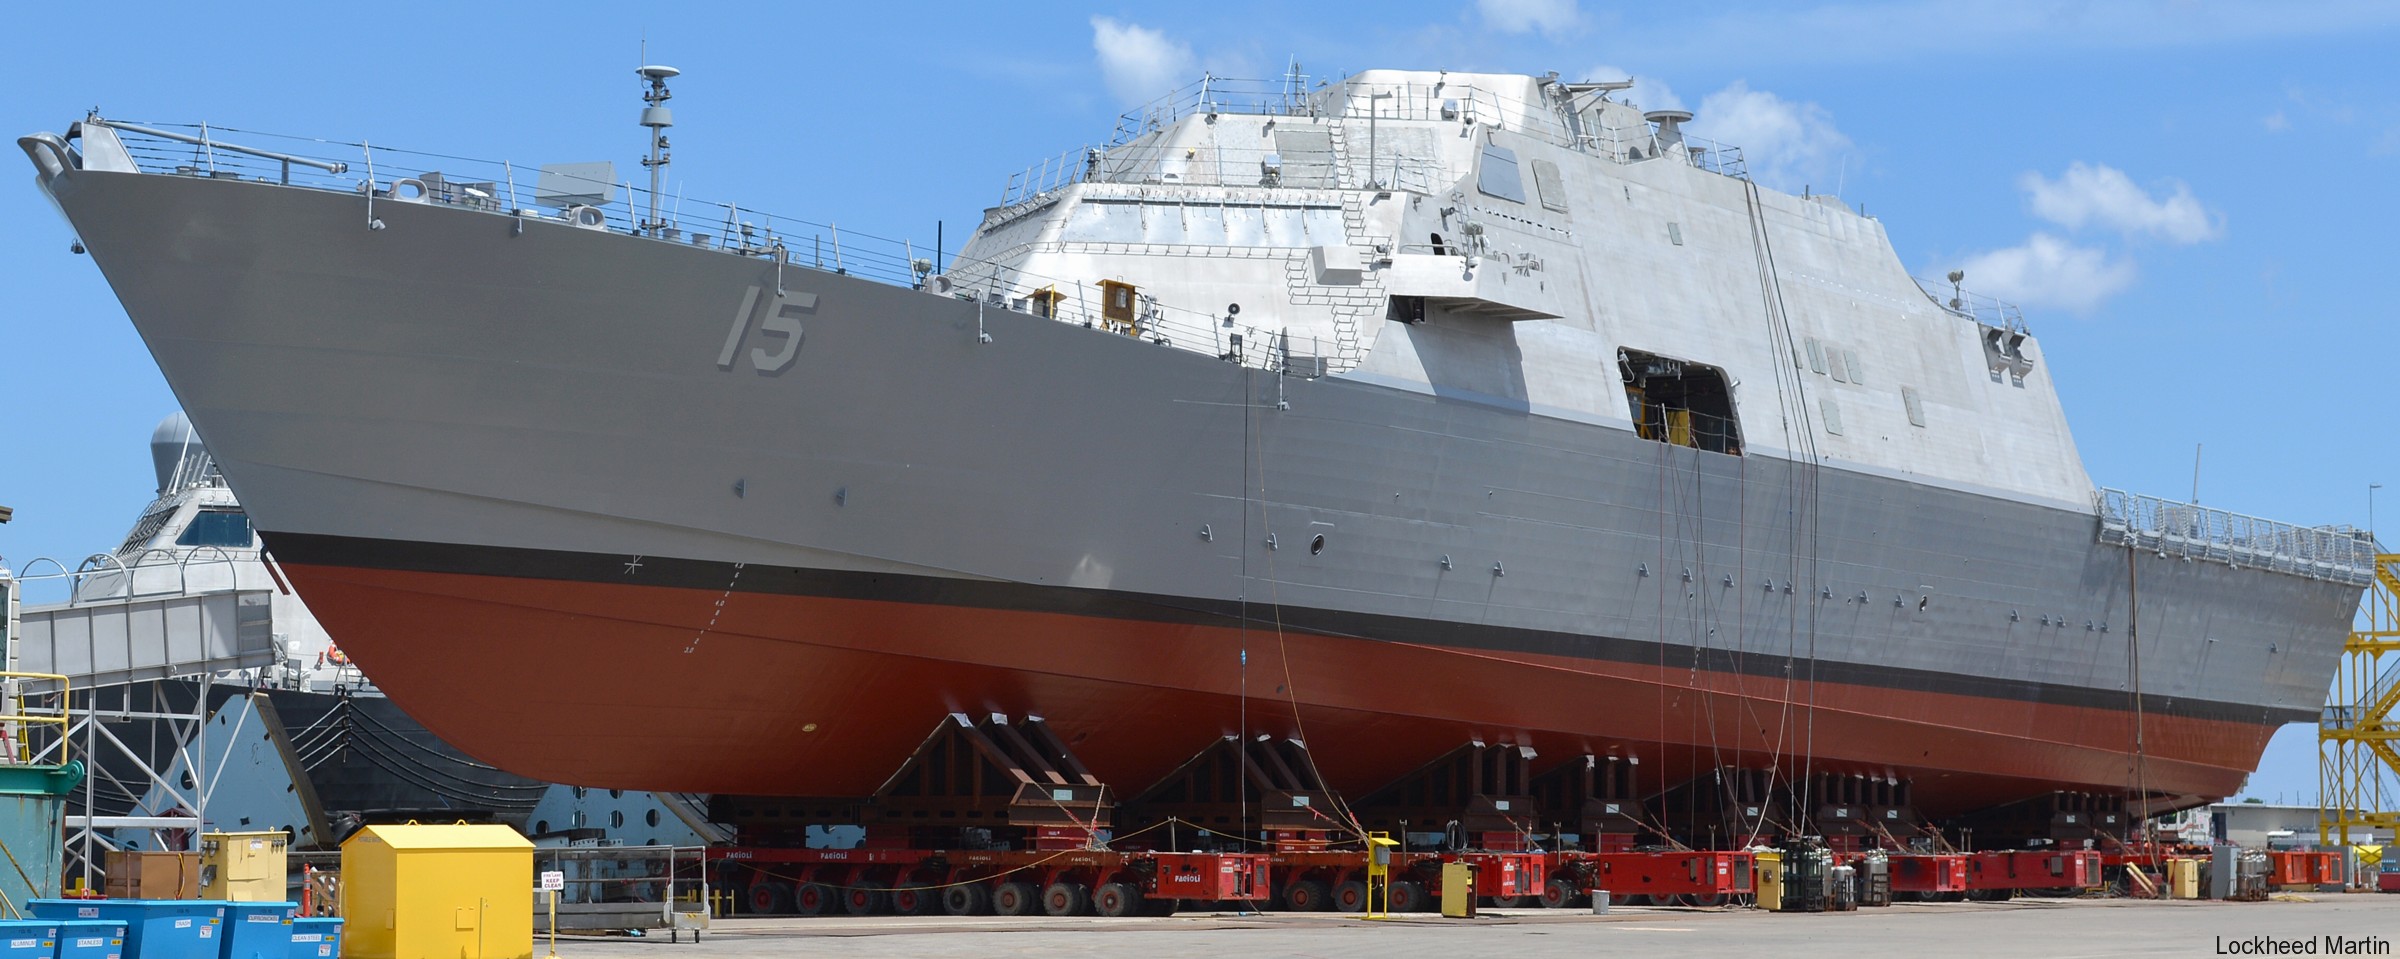 lcs-15 uss billings freedom class littoral combat ship us navy 44 moce out fincantieri marinette marine